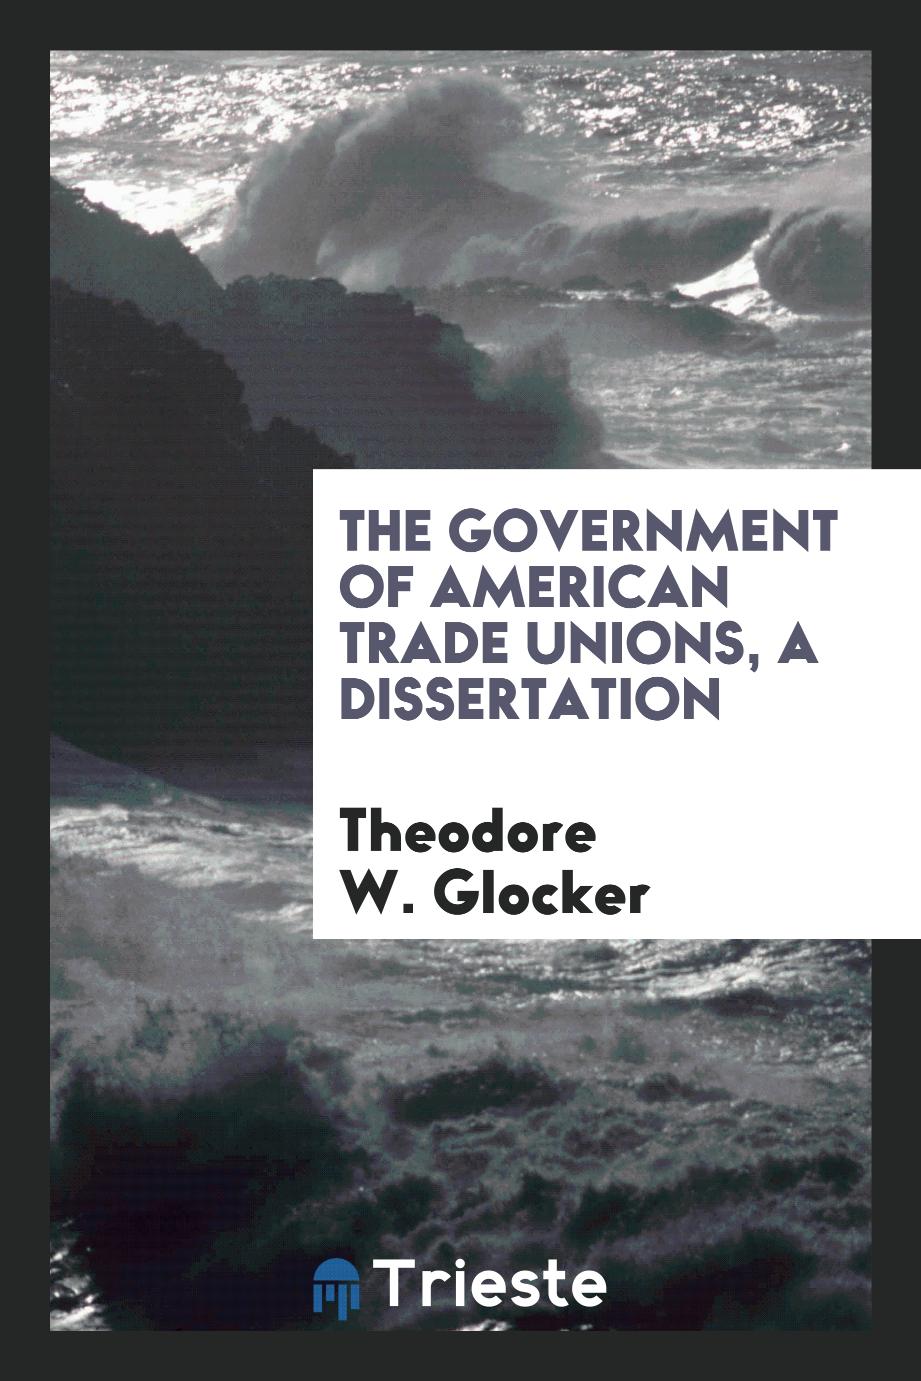 The Government of American Trade Unions, a Dissertation